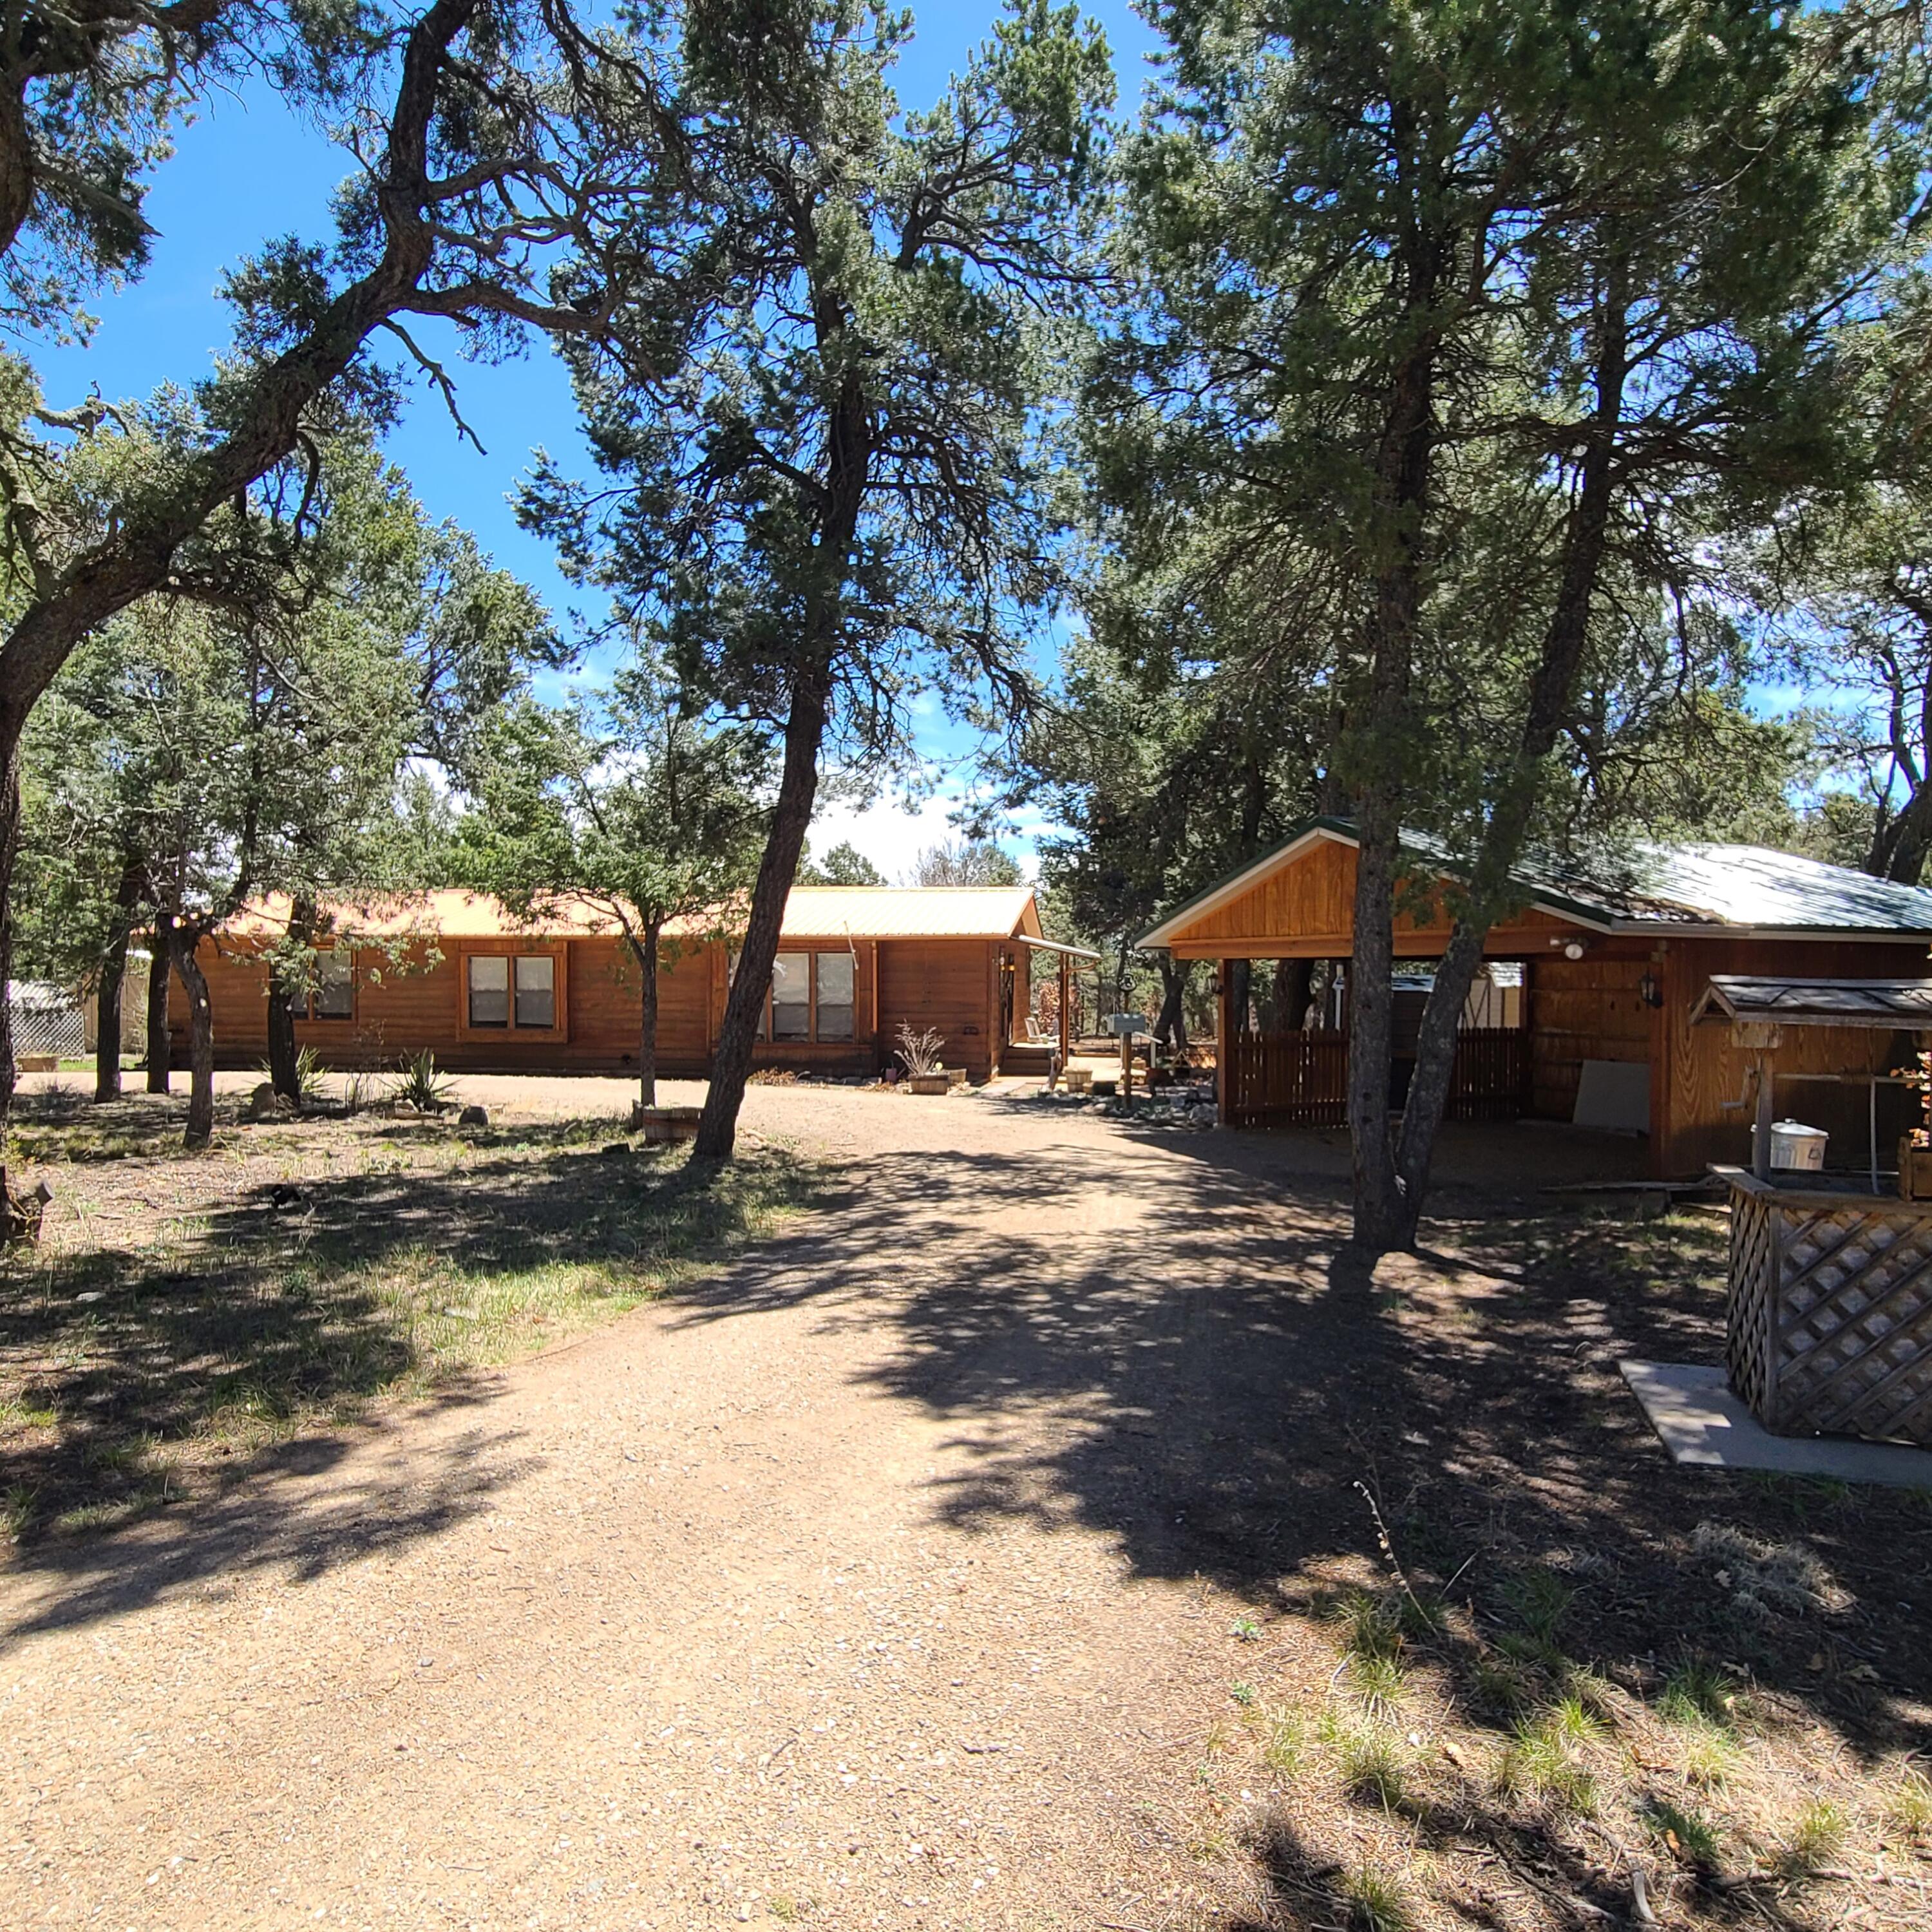 Welcome to Paradise! No traffic, 2 acres serene greenery w/ pines, cedars, pinons, oaks! Nestled in the trees, private retreat been dreaming about. Single level, 3 bed with poss 4th, 2 bathrms, no carpet, spacious! 2 car carport, multiple sheds, workshop w/ power, greenhouse, RV pad with dump sump & power. Walk in to high ceilings, open plan, lg windows. Living rm has wood burning FP, 2 dining areas/flex space. Spacious kitchen w/ gas stove, 2 pantries, corner windows. Down the hall 3 bedrms, spare full bath, storage, coat closet. Primary is large, any size furn will fit. 2 closets, 2 sink vanity, large walk in shower, storage, window with a view. Bonus 4th bedrm/office/flex rm with door to BY deck. NEW septic drain field, furnace, water heater, roof resealed, exterior getting sealed. GEM